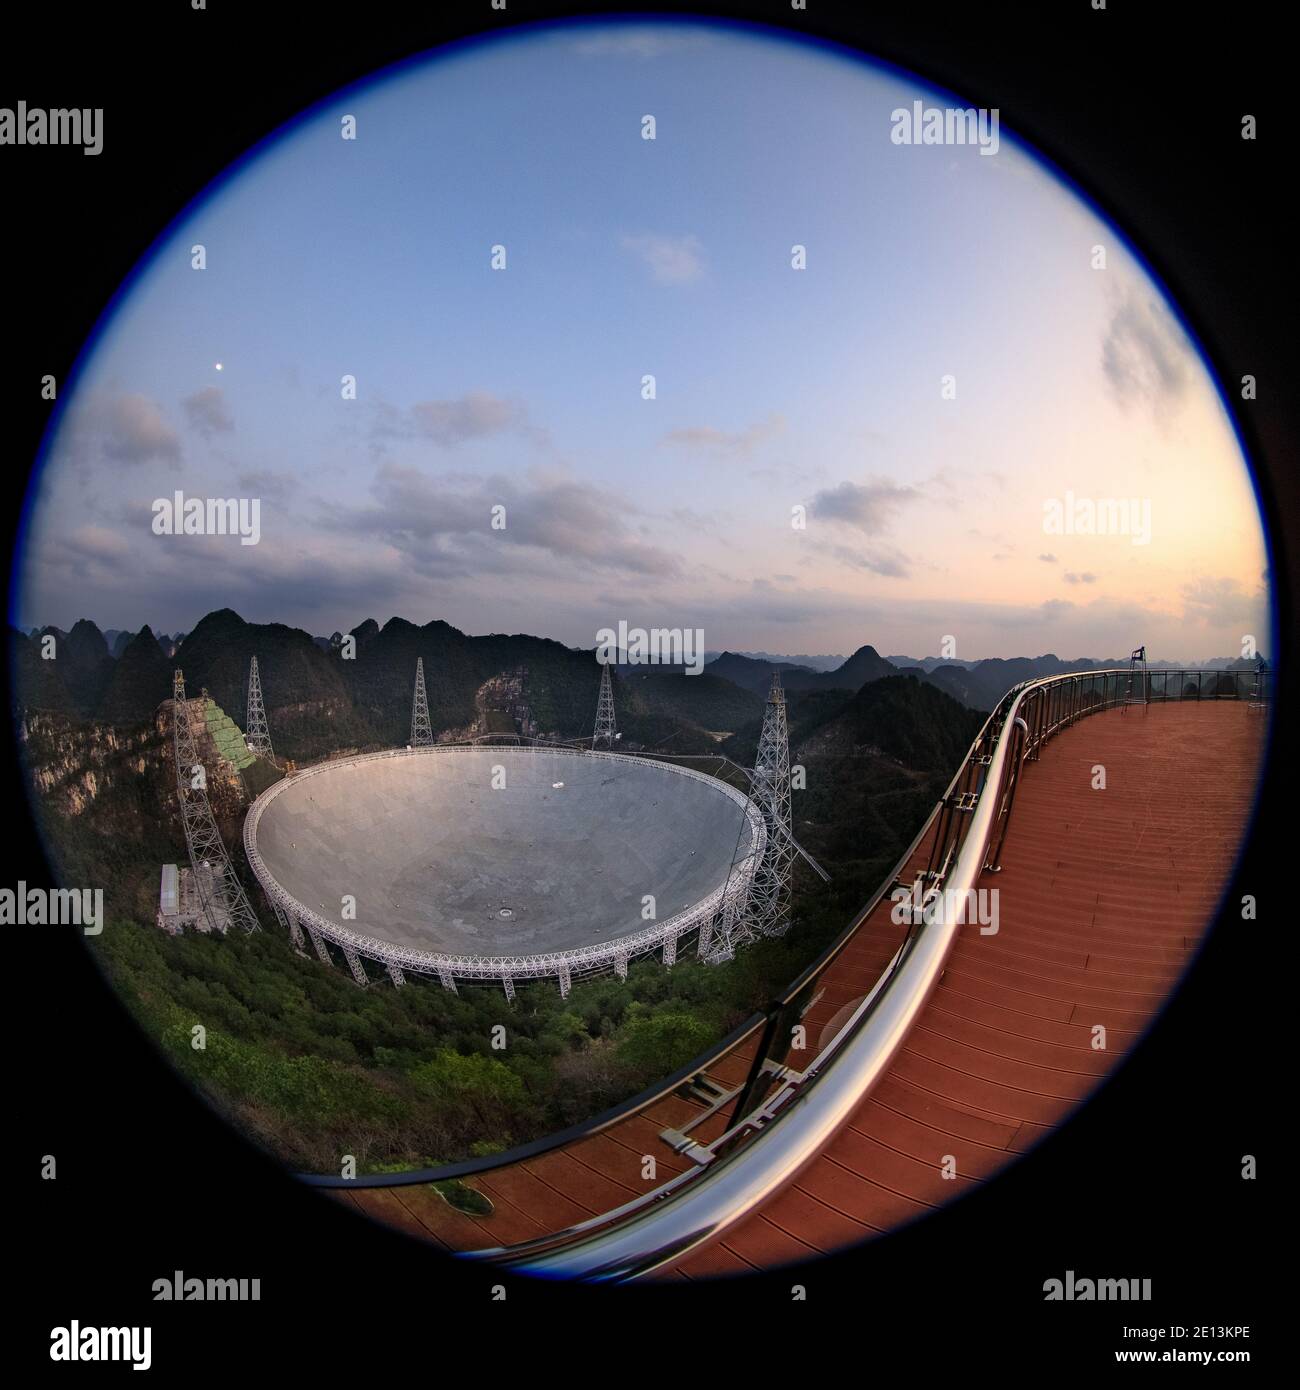 (210104) -- GUIYANG, Jan. 4, 2021 (Xinhua) -- Photo taken on Jan. 8, 2020 shows China's Five-hundred-meter Aperture Spherical Radio Telescope (FAST) under maintenance in southwest China's Guizhou Province. China's FAST, the world's largest single-dish radio telescope, will be available for global service from April 1. The National Astronomical Observatories of China (NAOC) of the Chinese Academy of Sciences, the operator of the telescope, confirmed Monday that scientists across the world can make online appointments for using the device for observation from April 1. An allotted timetable wil Stock Photo